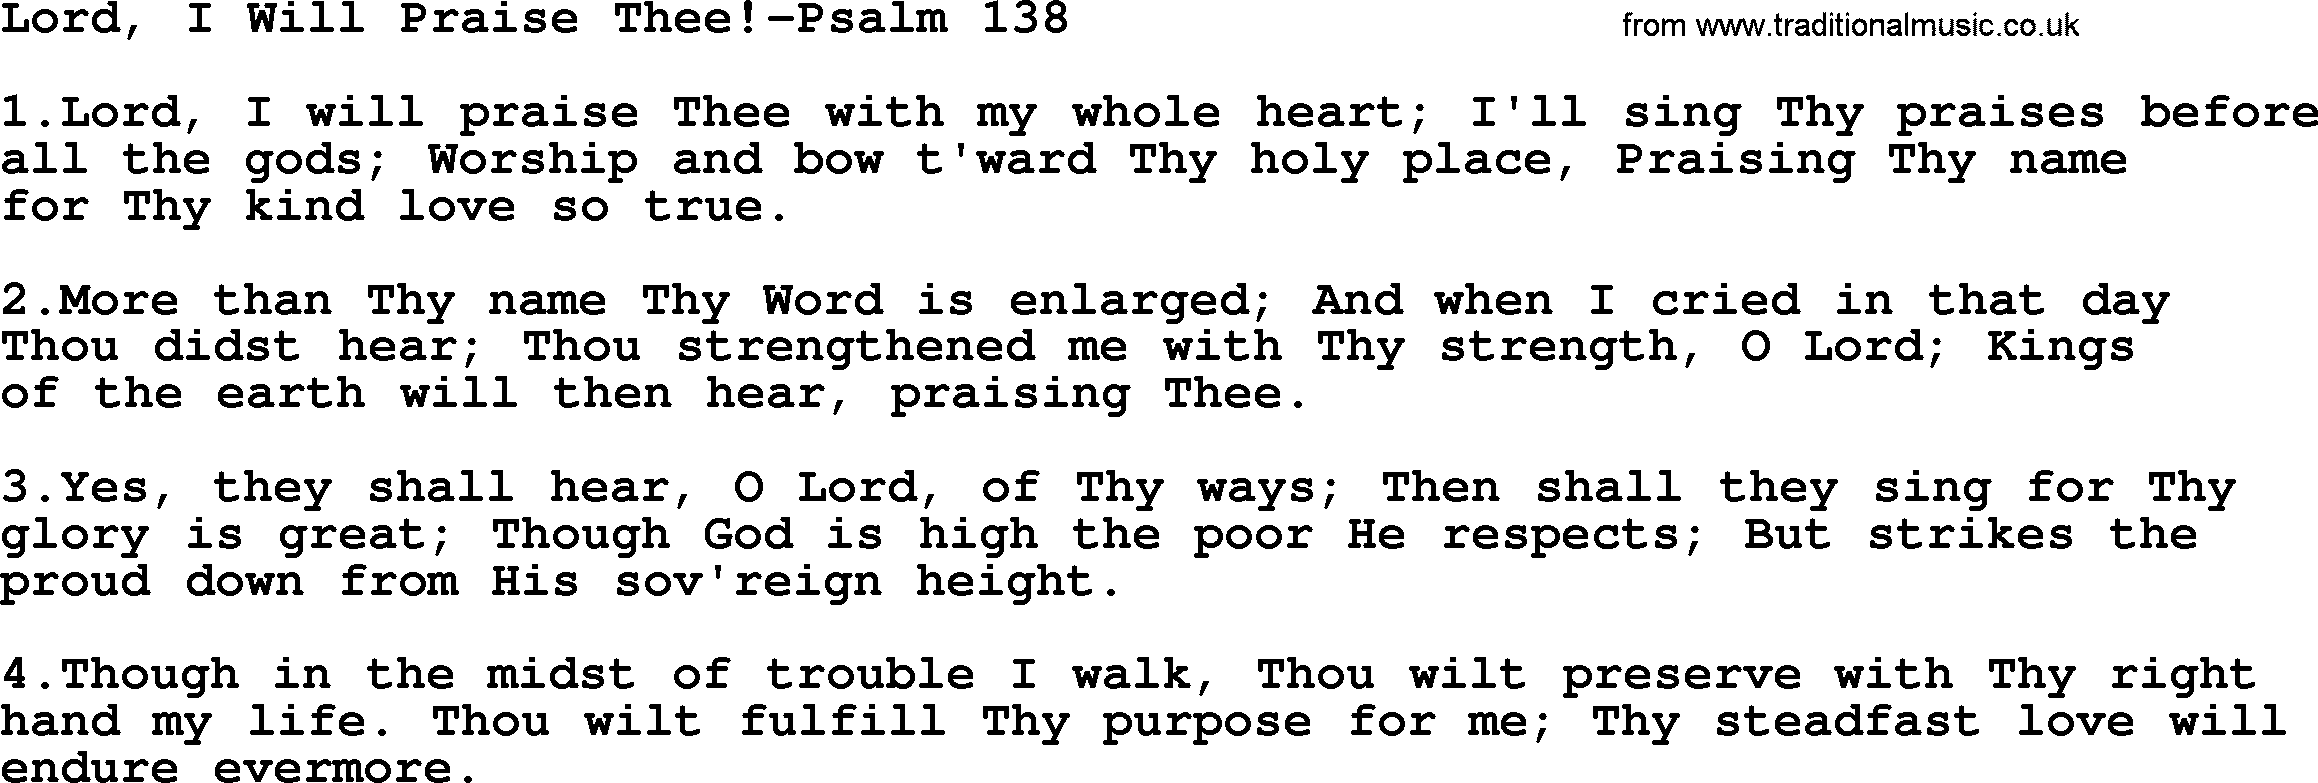 Hymns from the Psalms, Hymn: Lord, I Will Praise Thee!-Psalm 138, lyrics with PDF